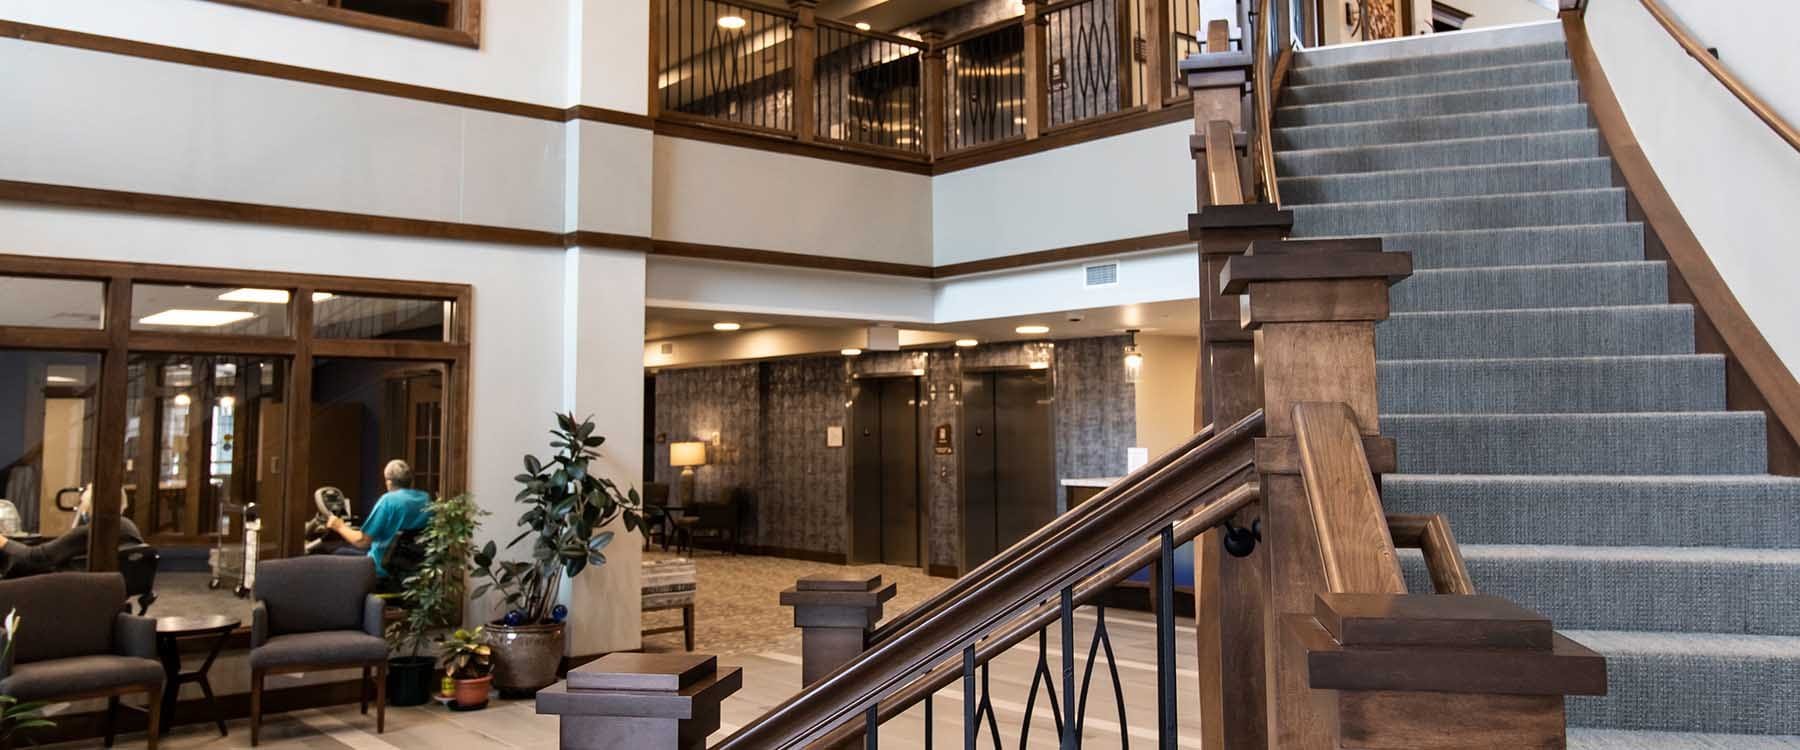 Trinity Woods Intergenerational Living. The Grand Stair provides opportunity to meet others